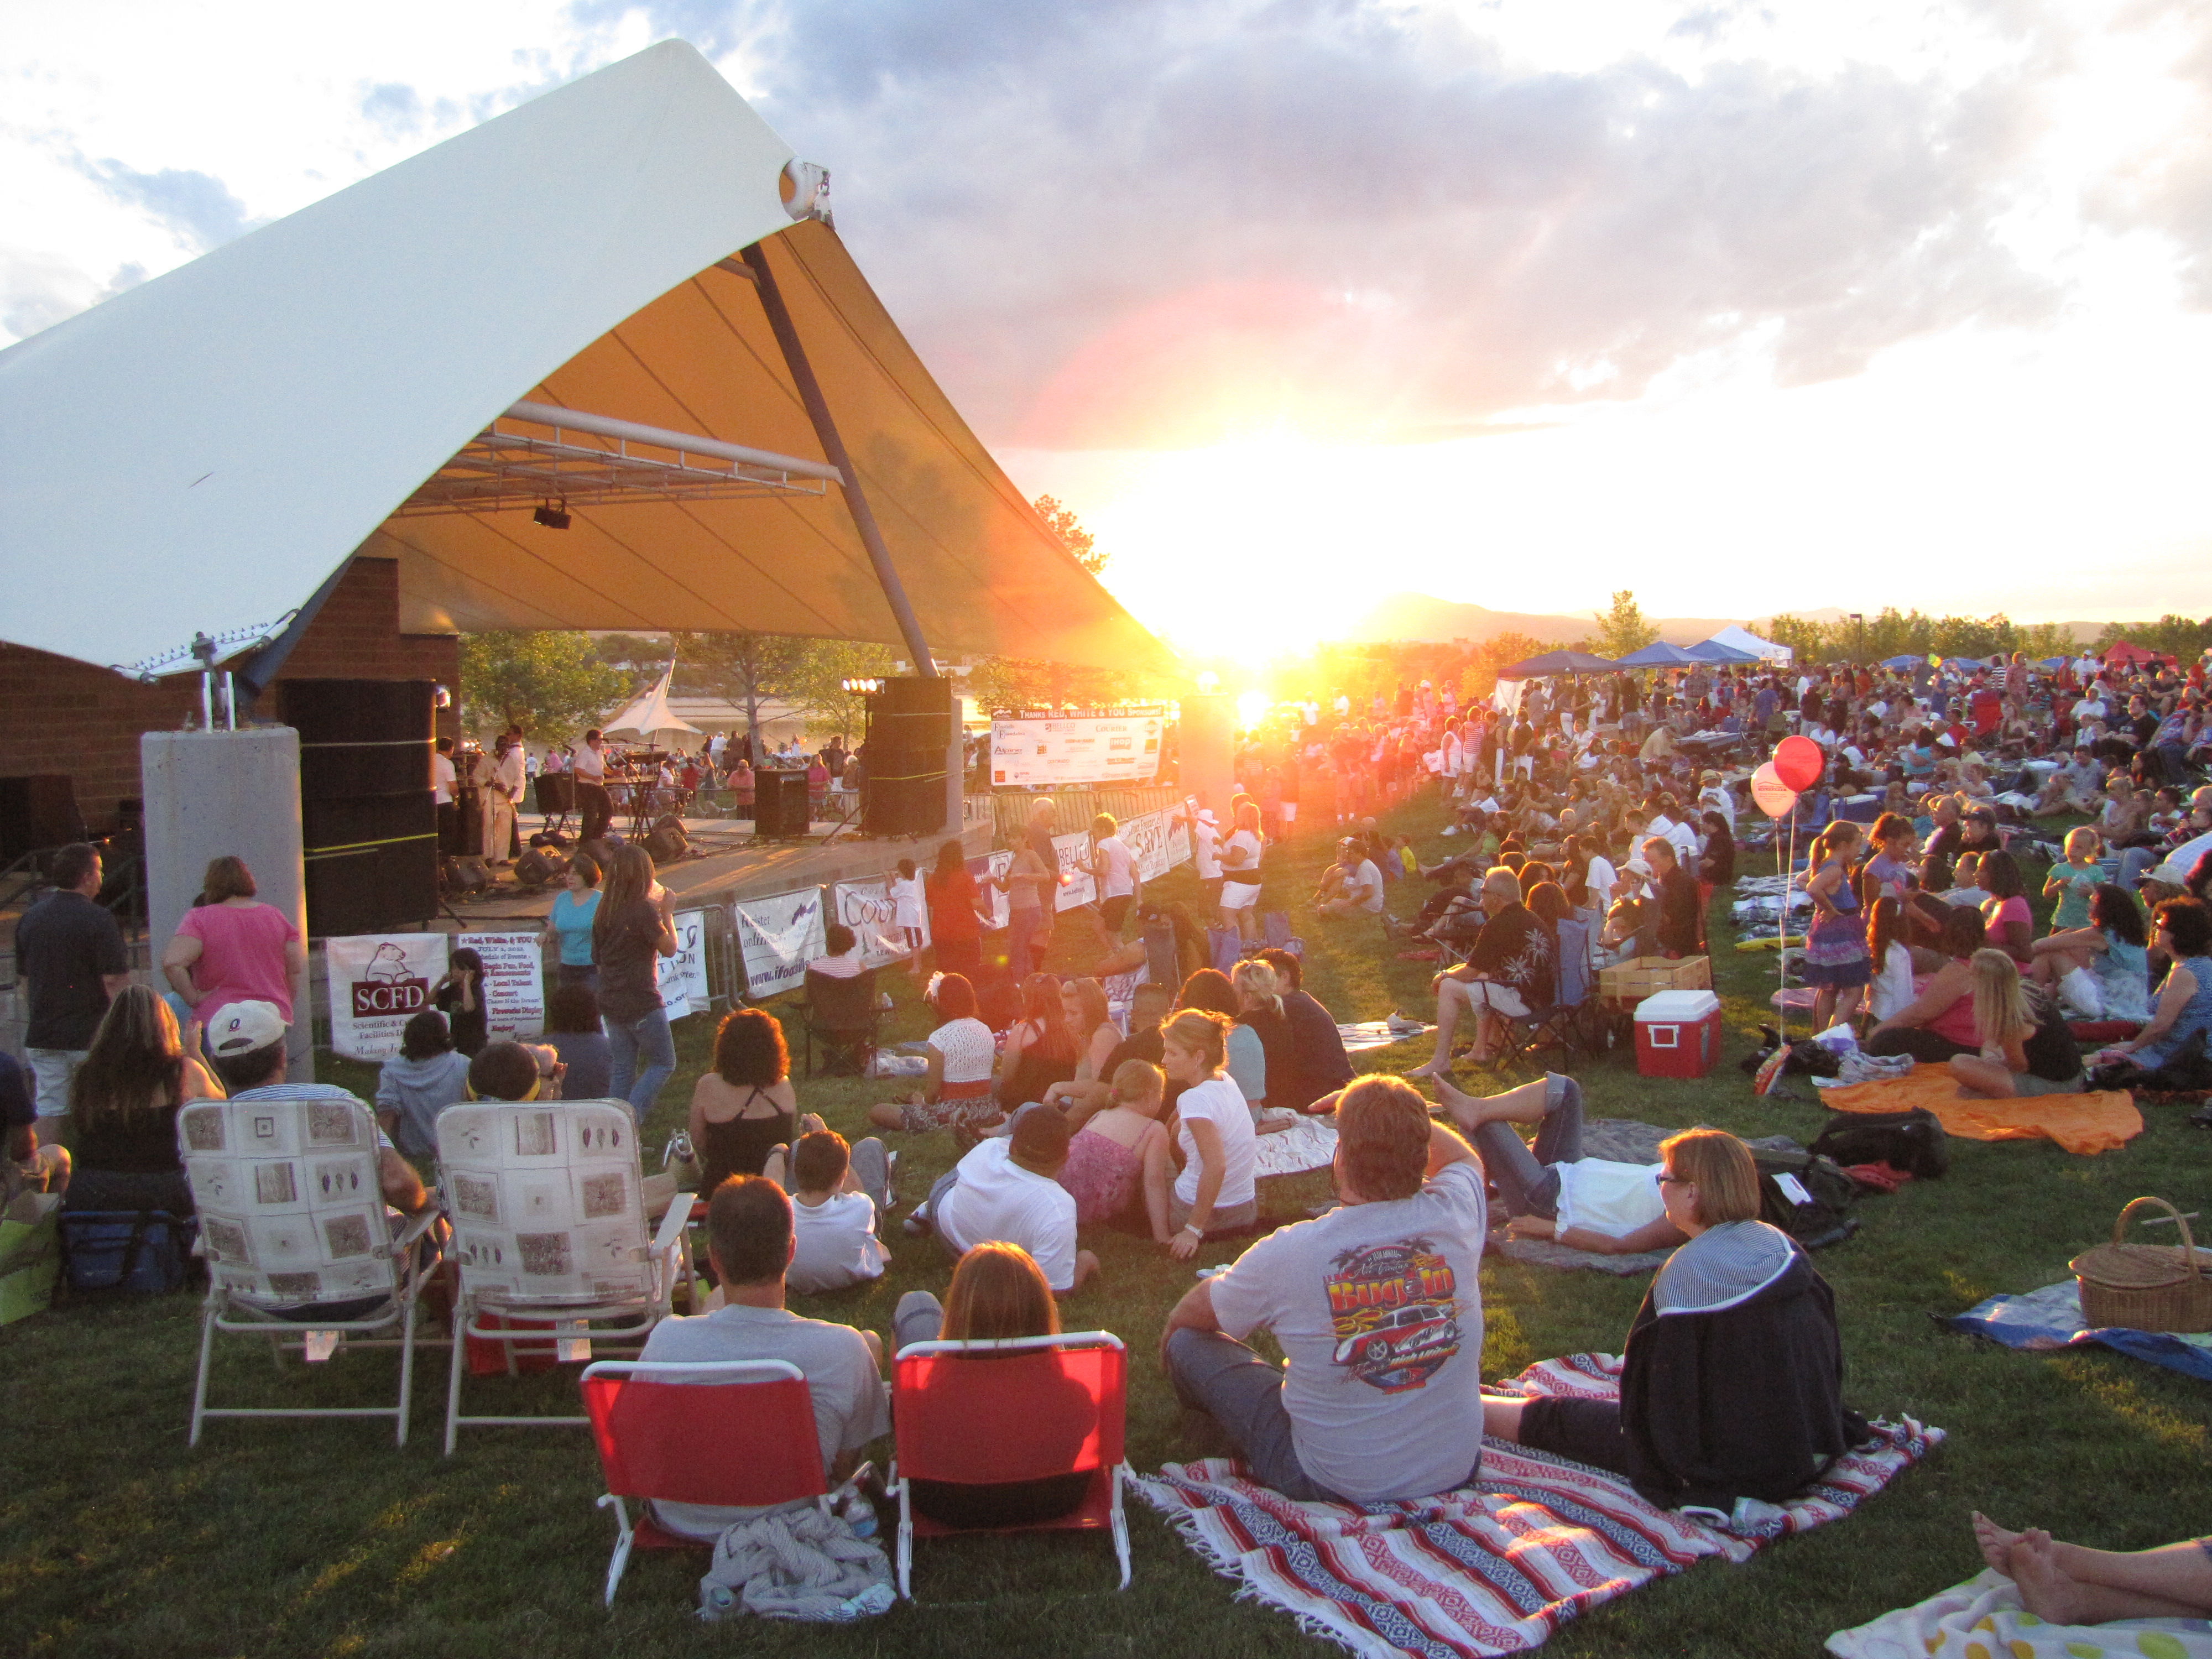 Crowd of people attending a concert at the Grant Amphitheater in Clement Park